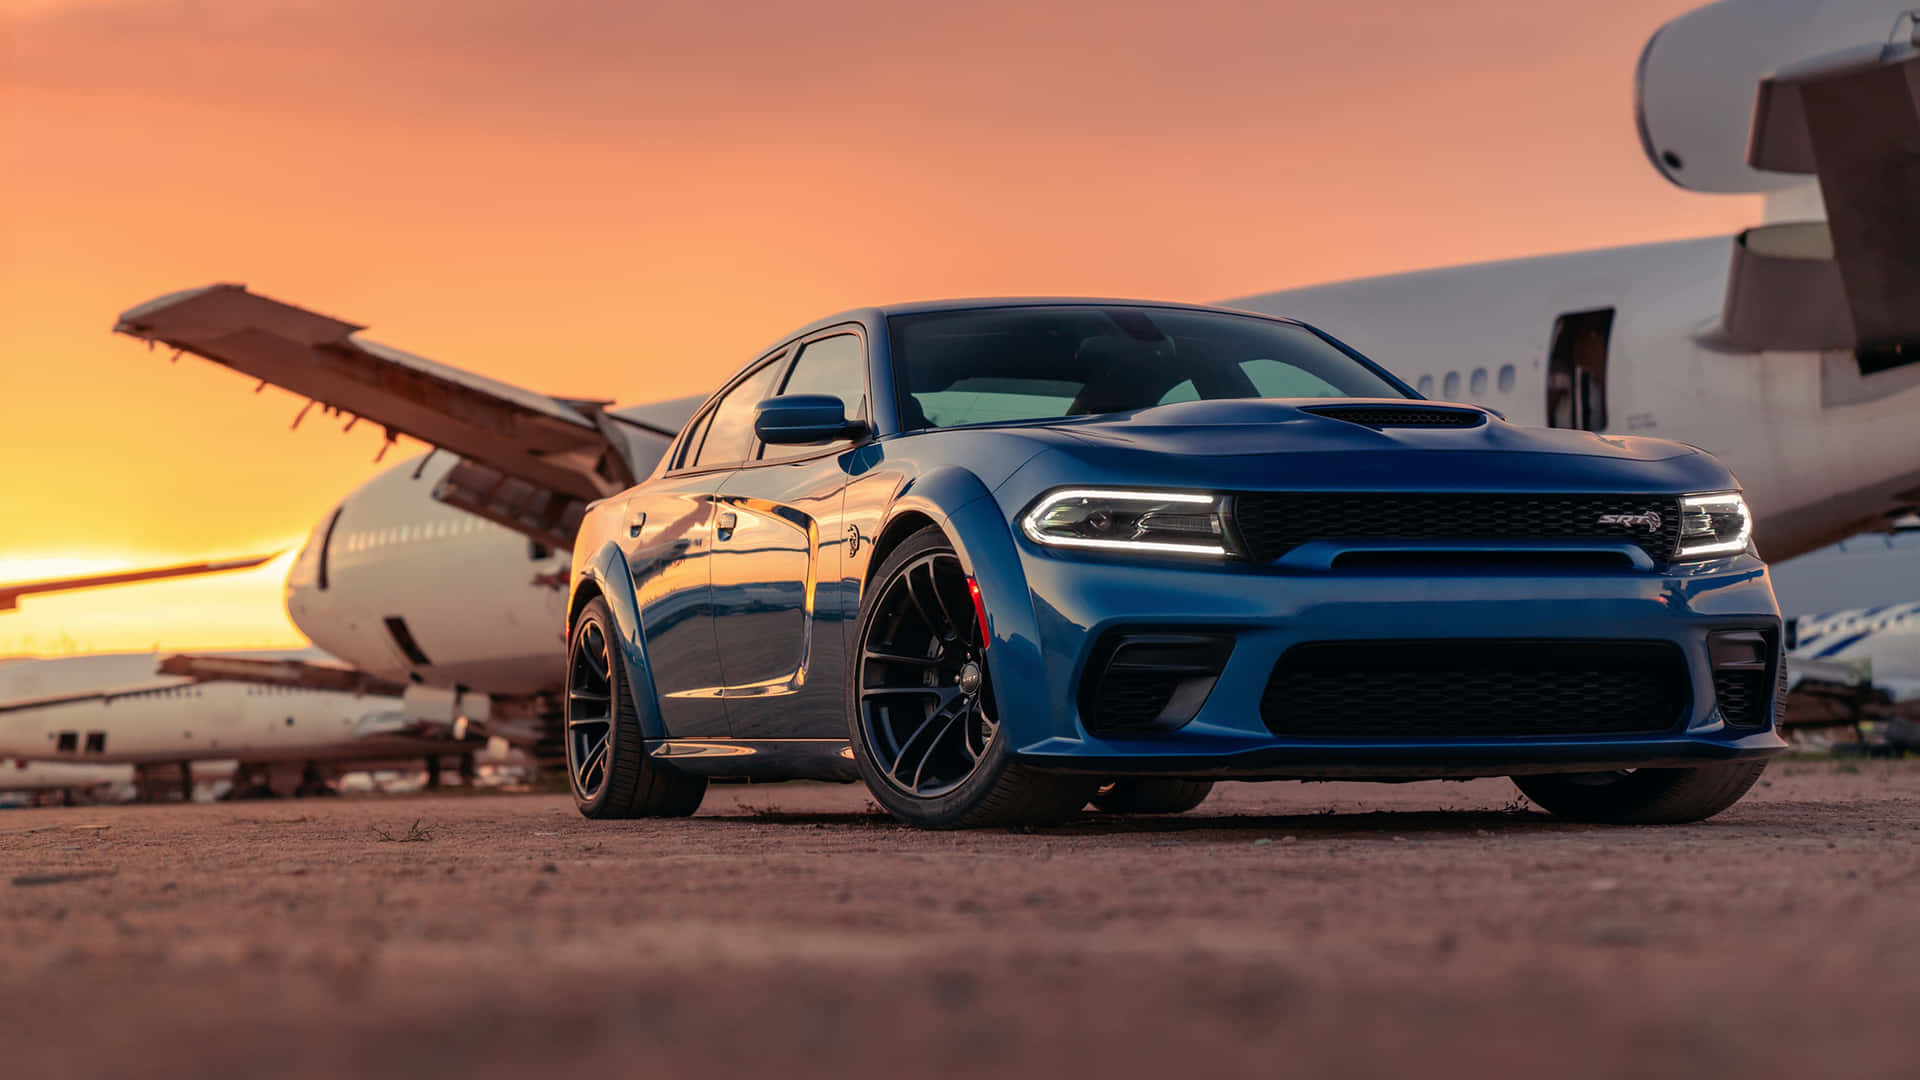 The Blue Dodge Charger Parked In Front Of An Airplane Wallpaper